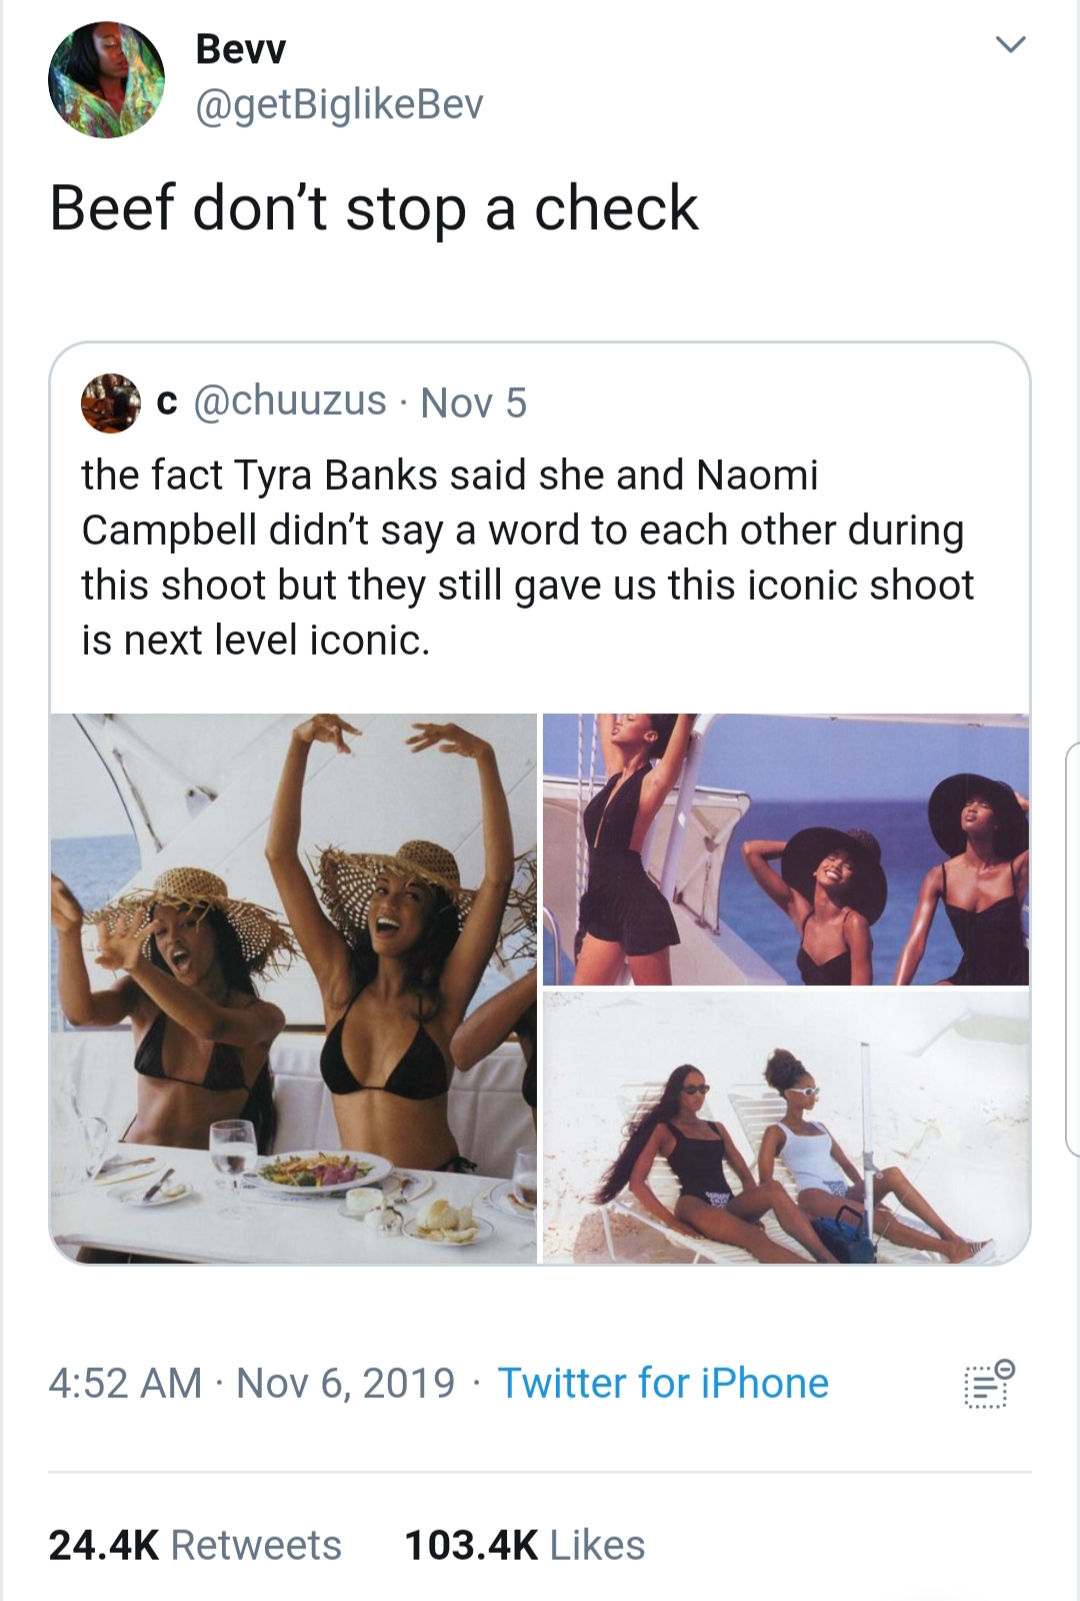 black twitter - naomi campbell and tyra banks - Bevv Beef don't stop a check c. Nov 5 the fact Tyra Banks said she and Naomi Campbell didn't say a word to each other during this shoot but they still gave us this iconic shoot is next level iconic . Twitter